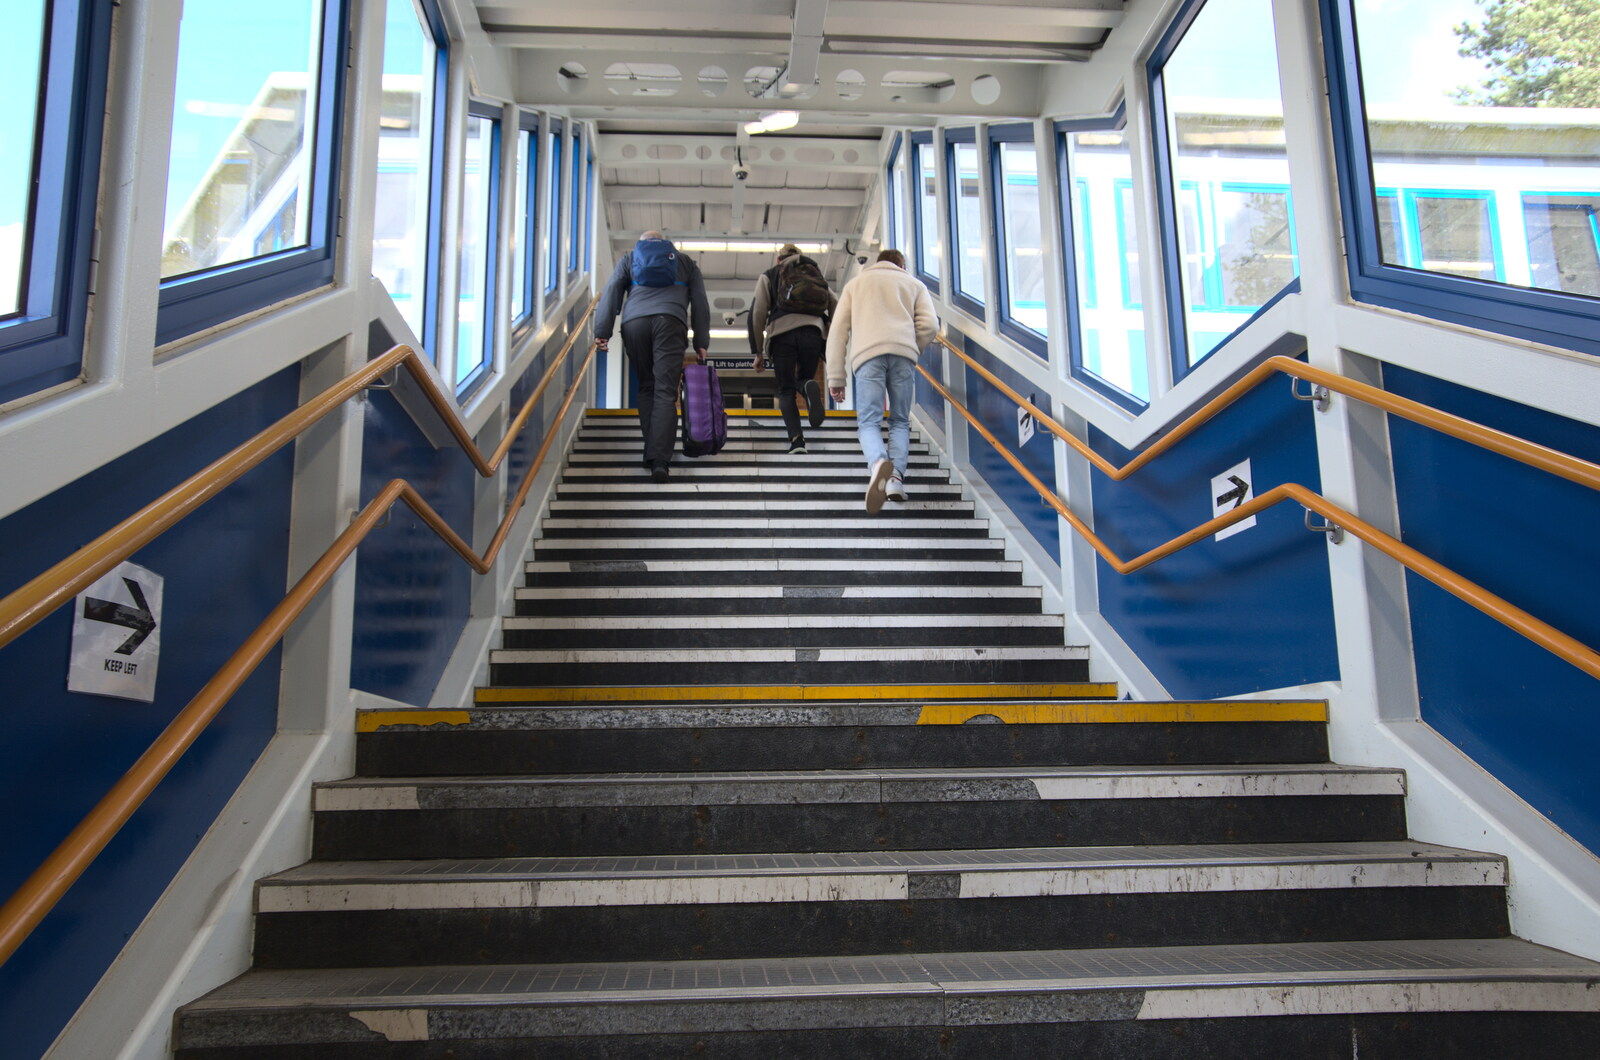 A Trip Down South, New Milton, Hampshire - 9th April 2022: The steps out of the station